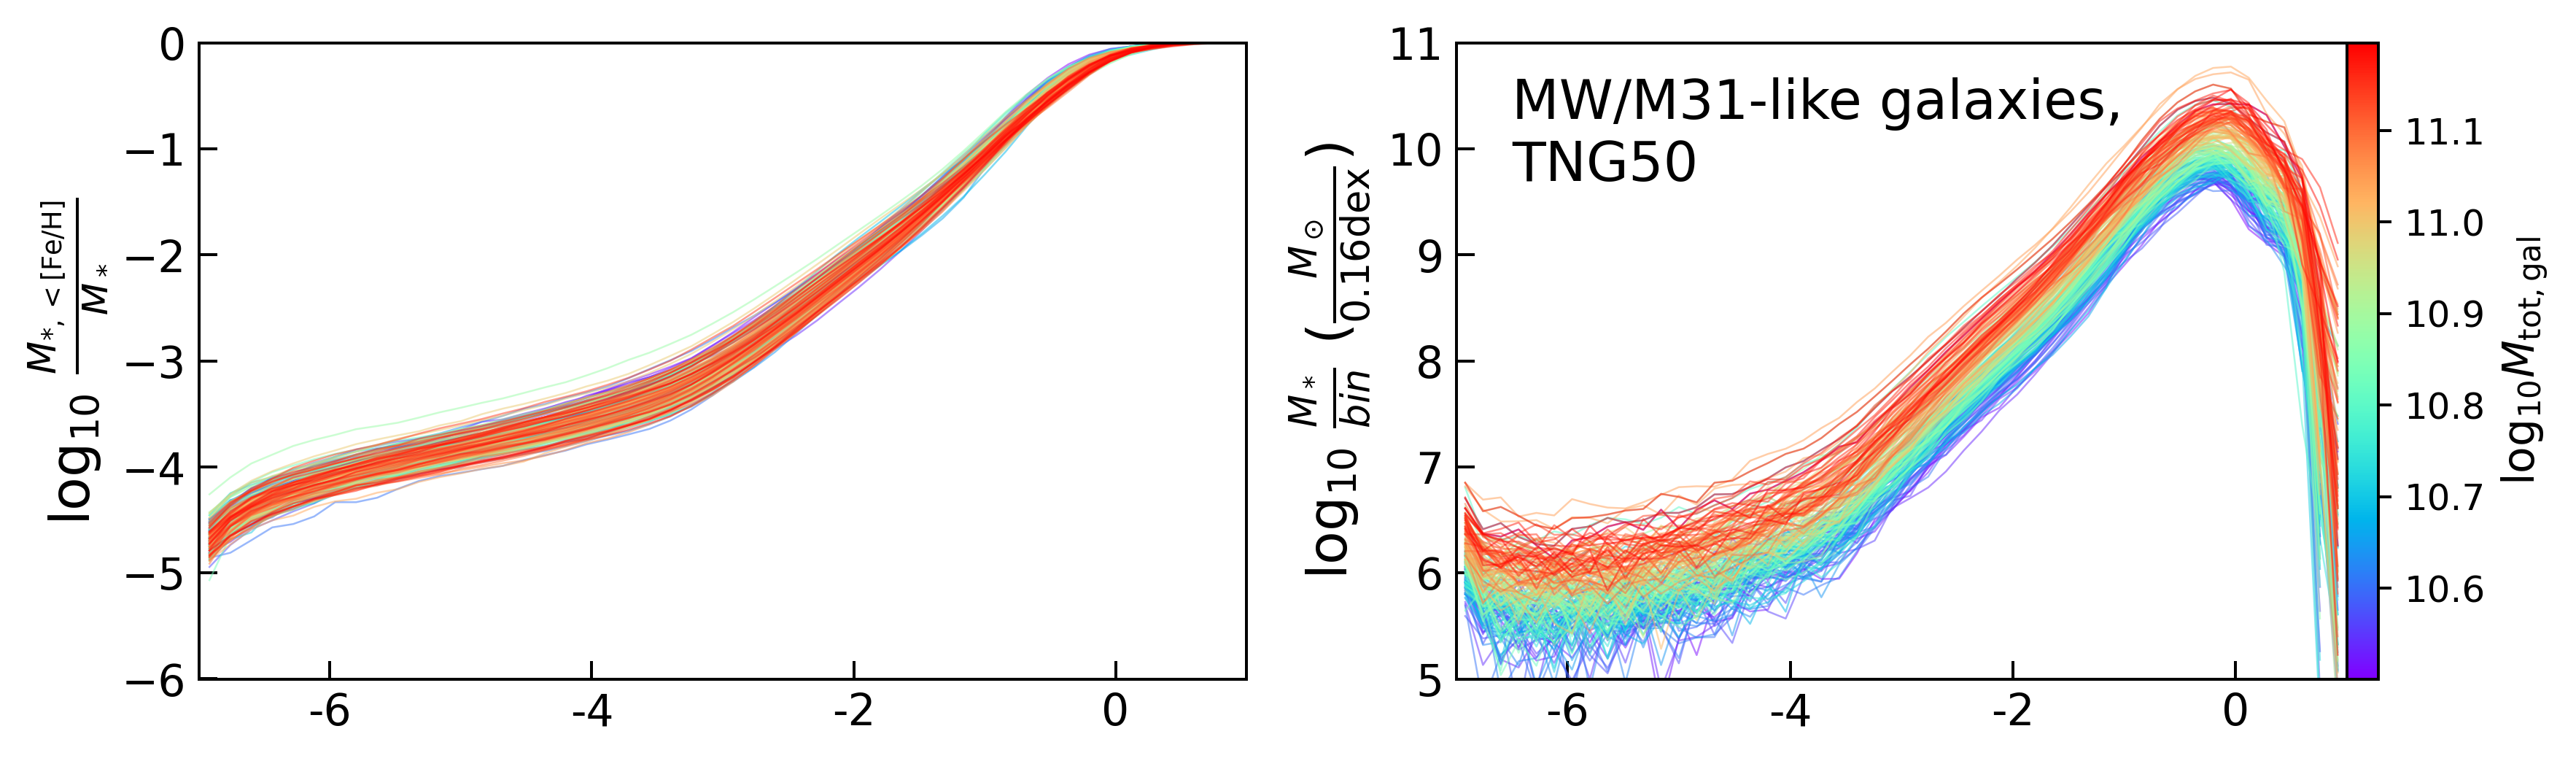 {\bf Stellar metallicity distribution functions (MDFs) of MW/M31-like galaxies in TNG50.} {\it Top panels:} we show the MDFs of all 198 MW/M31 systems, across {\it all} their morphological components: disks, bulge, stellar halo and satellites, colour coded by galaxy stellar mass. The redder the colour, the higher the galaxy stellar mass. On the left, we show the cumulative fraction and on the right, we show the stellar mass. {\it Middle three panels:} MDFs of the subsample TNG50 galaxies with mass more similar to the Milky Way (gray curves) overlaid to results from observations and thus with stars selected by height and radial distance to attempt to account for the surveys' selection functions: we report here the Milky Way's MDF by \citet[][green]{Youakim:2020aa}, \citet[][magenta]{Bonifacio:2021aa}, and by \citet[][orange]{Buder:2021aa}. For the middle left panel, we select stars that have heliocentric distances between 6 and 20 kpc, and at Galactic latitudes between 30 and 78 degrees ($|b| = 30-78$). The probability is then normalised to the total number of stars between $-4. < \feh < -1.05$ to compare with \citet{Youakim:2020aa}. In the middle central panel, we select stars that are < 6\,kpc from the galactic plane and < 14\,kpc from the galactic centre. The probability is again normalised to the total number of stars between $-4. < \feh < -1.05$ to compare with \citet{Bonifacio:2021aa}. For the middle right panel, we select stars that have heliocentric distances $<2$ kpc and that are positioned at Galactic latitudes larger than 10 degrees ($|b| > 10$) to compare with data from GALAH survey Data Release 3 \citep{Buder:2021aa}. In order to take into account the distance-selection criterion from the survey, the solar position in each MW-like galaxy is randomly sampled, at 8.2 kpc from the galactic centre, and we compute the mean MDF over 100 possibilities. The probability is normalised to the total number of stars. {\it Bottom three panels:} MDF comparison to data from \citet[][shades of blue, for three different height selections]{Hayden:2015aa}. We group stars at different distances from the galactic plane to compare with \citet{Hayden:2015aa}, where the probabilities are normalised to total number of stars in each subset. We do not impose any additional selection function to TNG50 star particles but for the aforementioned geometrical spatial cuts that account for the effective footprints of the APOGEE survey Data Release 12. Note that the survey cannot report many metal-poor stars as it hits the detection limit at $\feh \sim -2$.